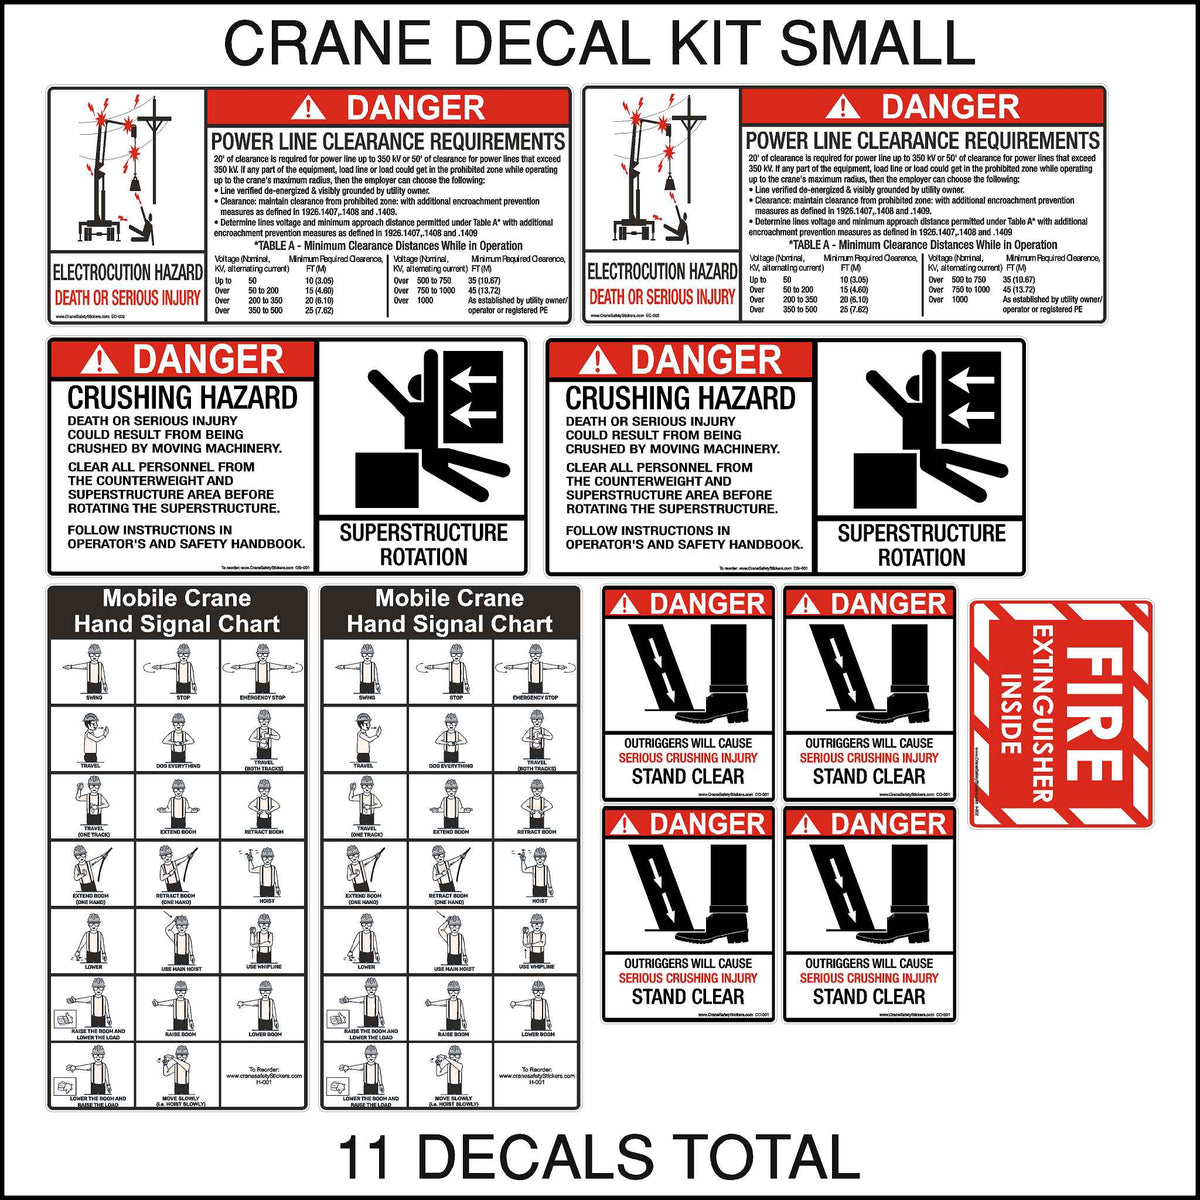 This small crane replacement sticker kit includes some of our most popular selling Crane Safety Decals. This kit contains 11 decals in total. This Small Crane and Boom Truck Safety Sticker Kit contains the stickers you need for most small cranes to pass certification including the following. Outrigger Crush, Mobile Crane Hand Signal Charts, Superstructure Rotation, Power Line Clearance Requirements, and Fire Extinguisher.